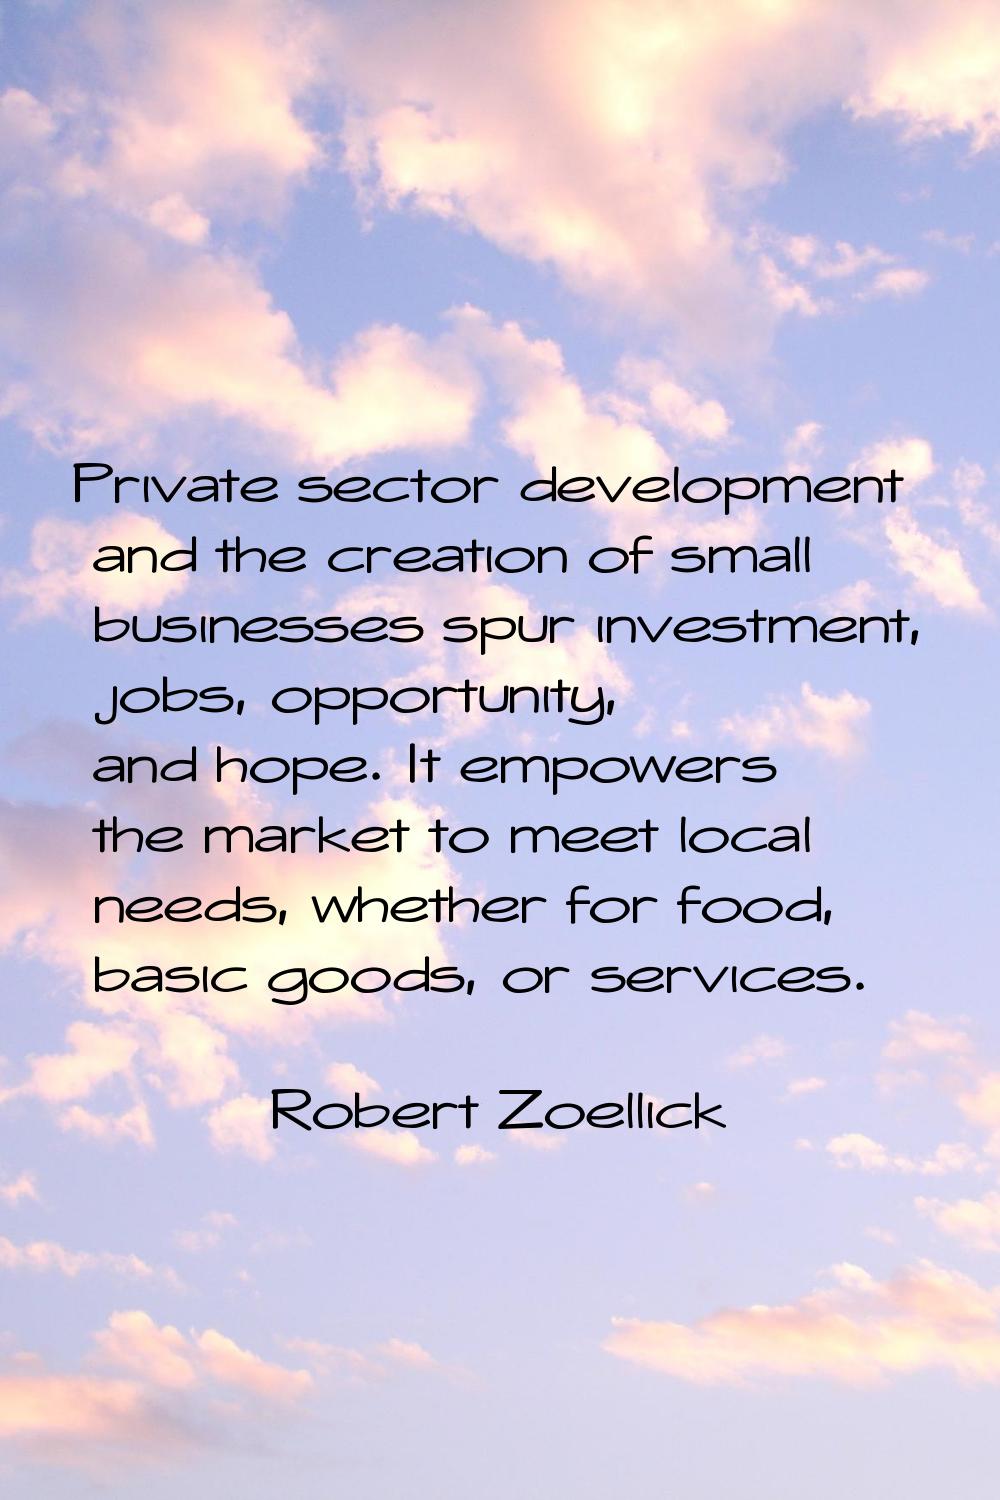 Private sector development and the creation of small businesses spur investment, jobs, opportunity,